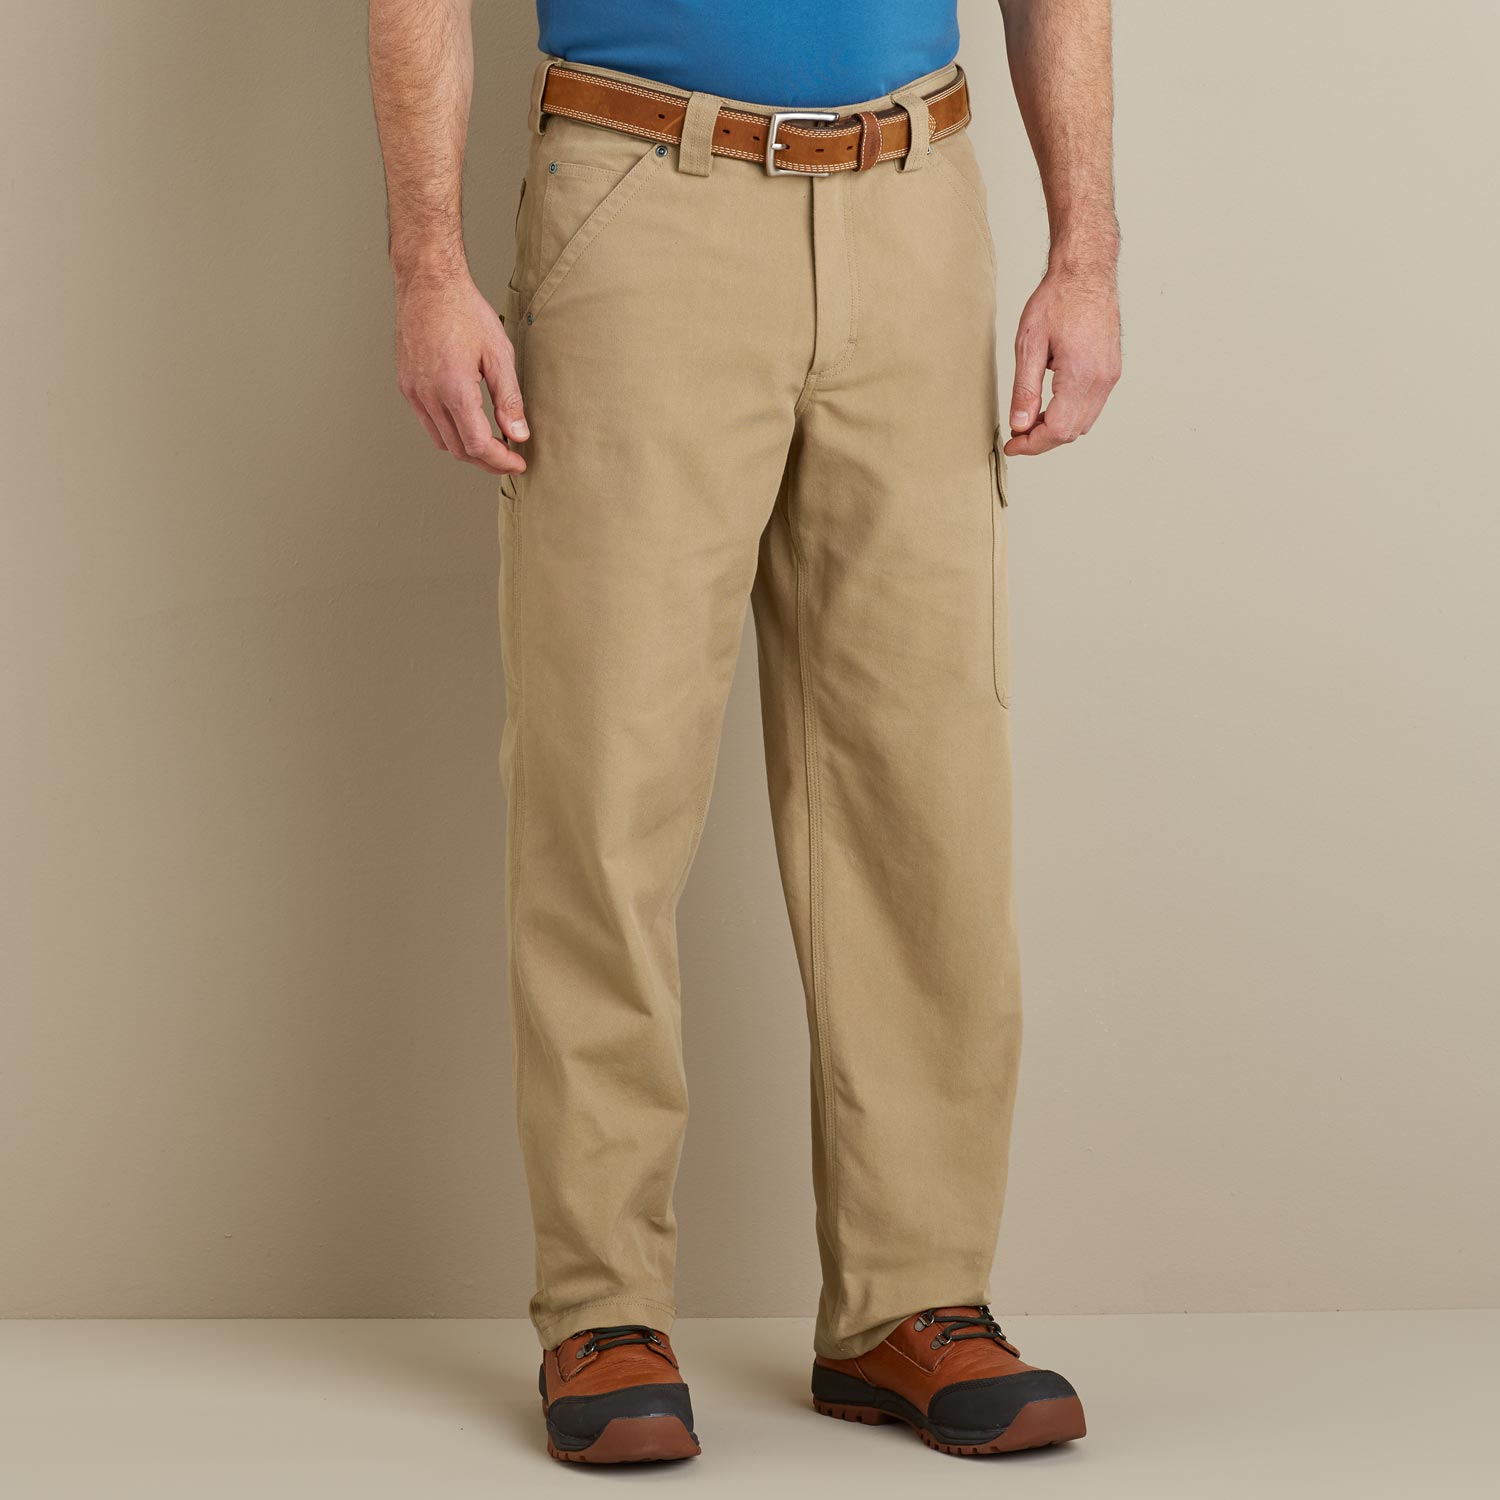 Men's CoolDry Fire Hose Summer Work Pants | Duluth Trading Company